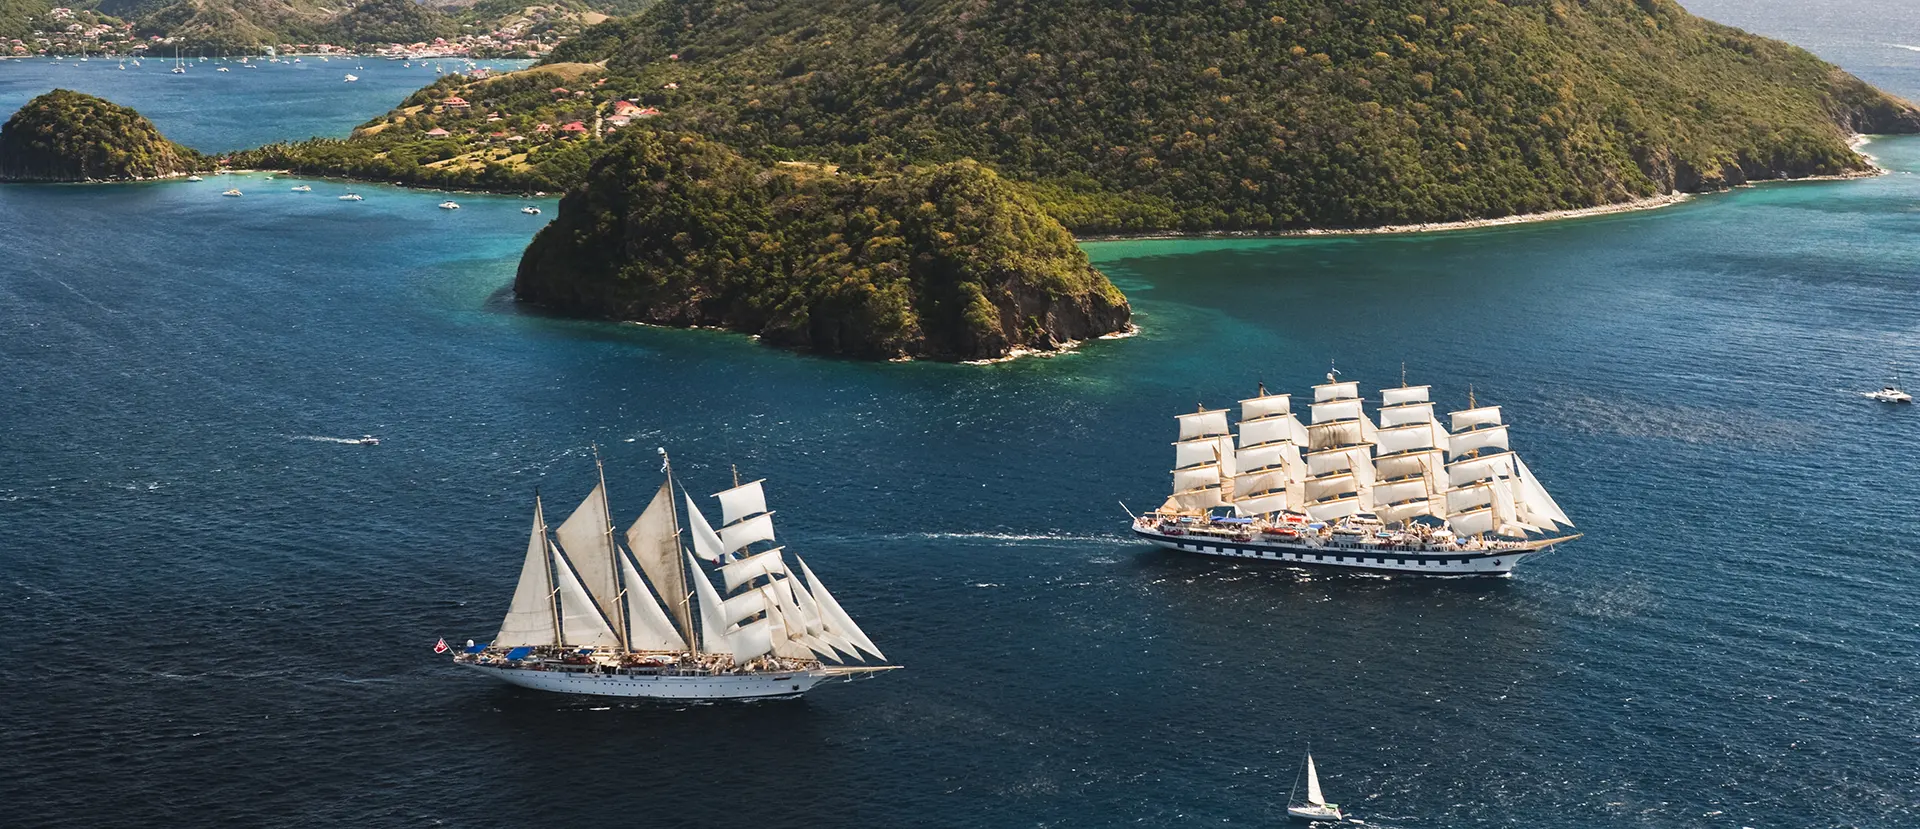 Star Clippers Cruises, Tall Ship Cruises